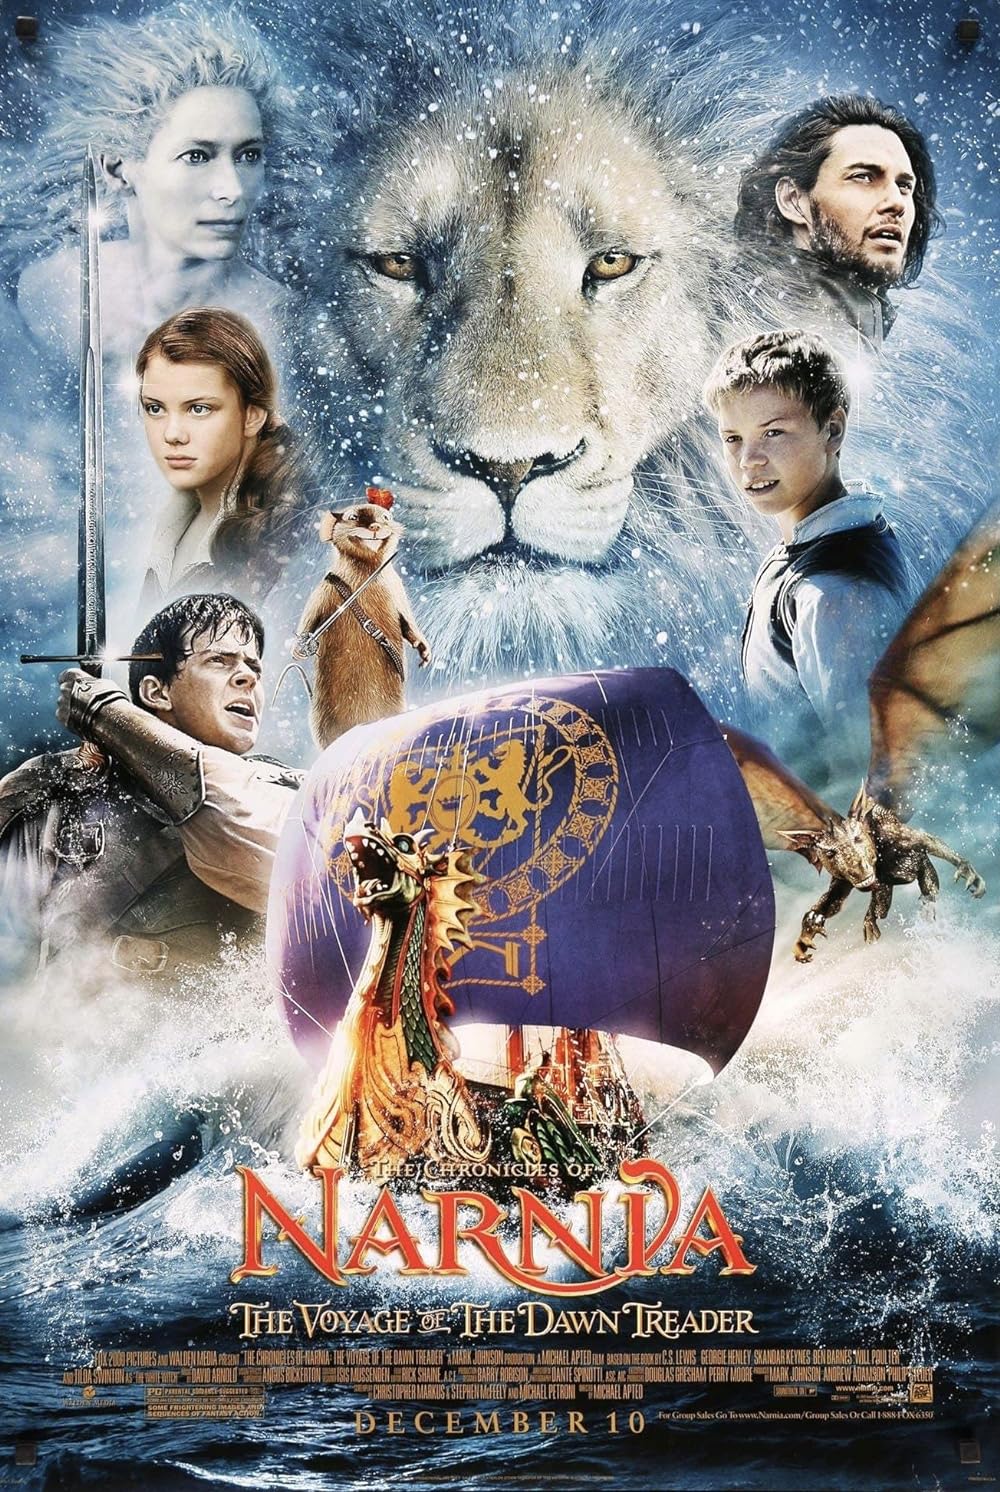 The Chronicles of Narnia: The Voyage of the Dawn Treader (2010) 128Kbps 23.976Fps 48Khz 2.0Ch Disney+ DD+ E-AC3 Turkish Audio TAC